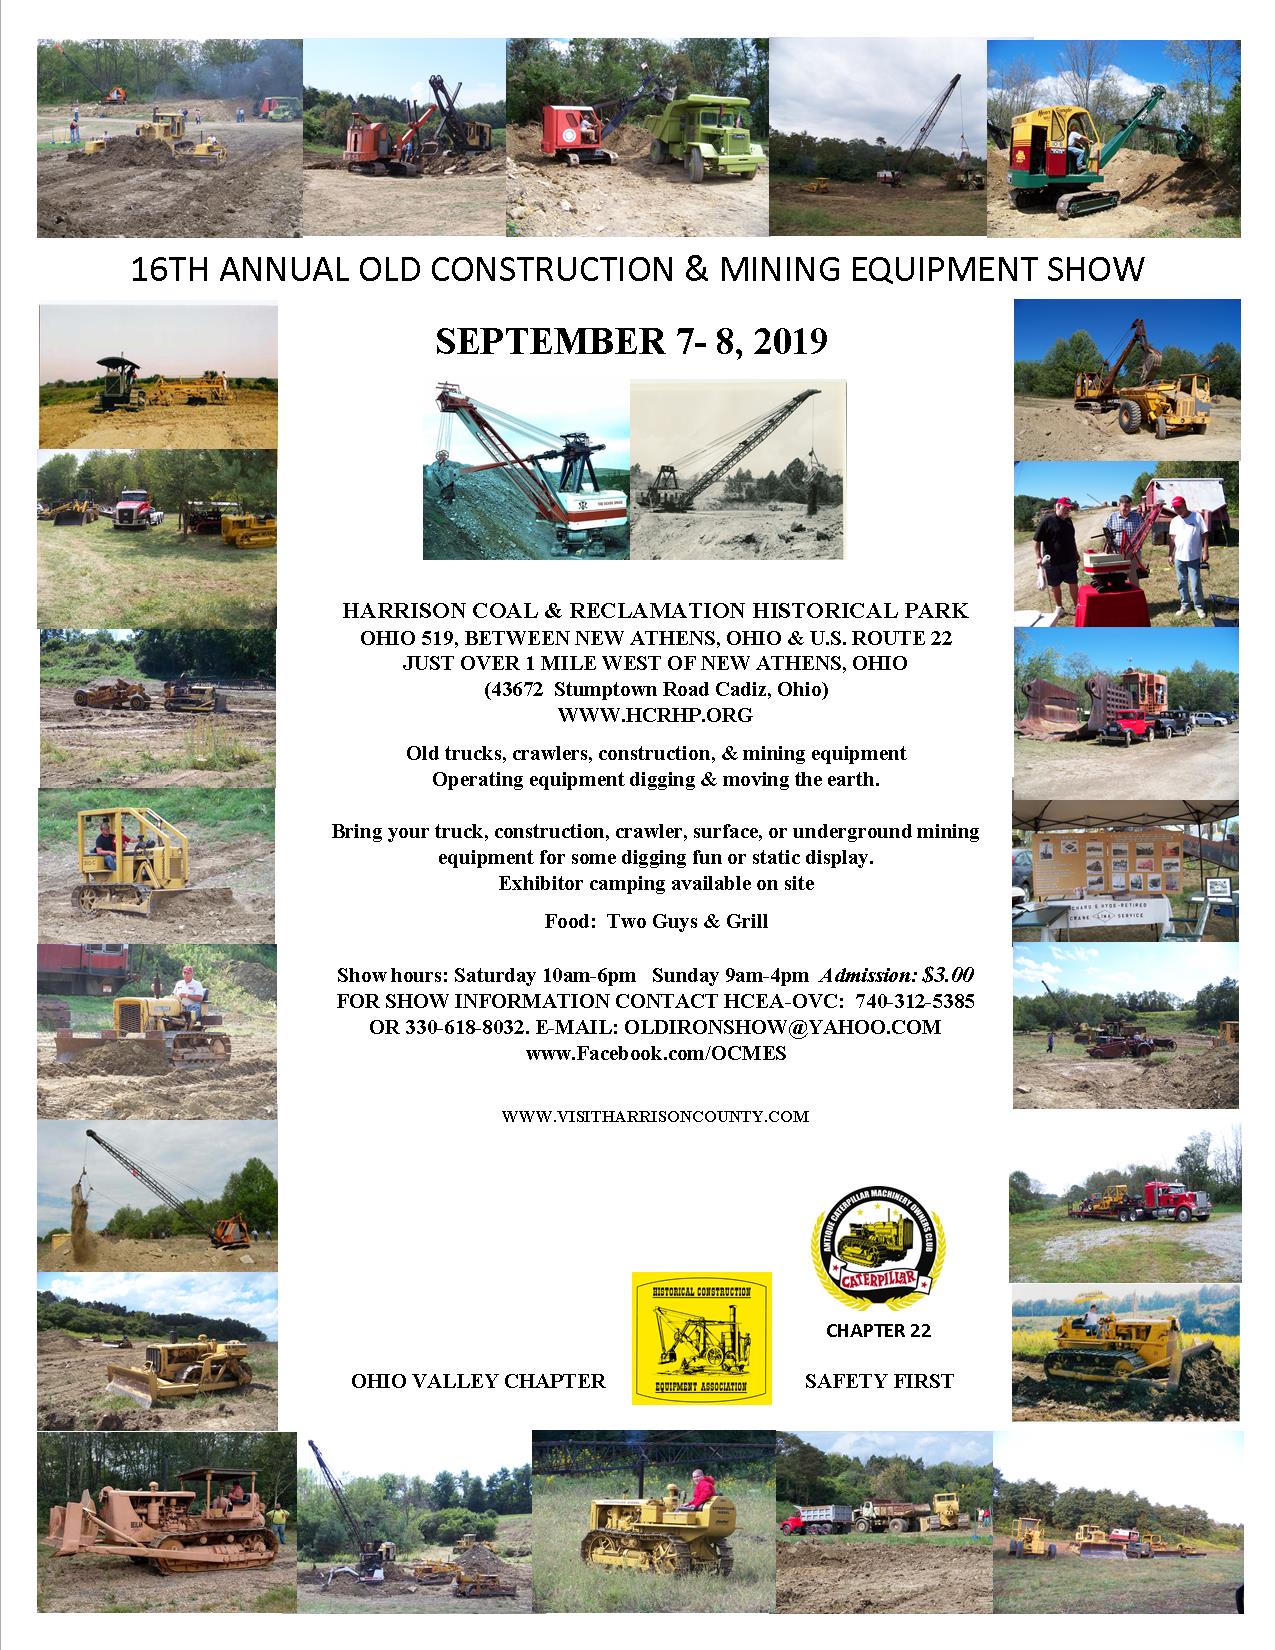 A flier for the 16th Annual Old Construction & Mining Equipment Show September